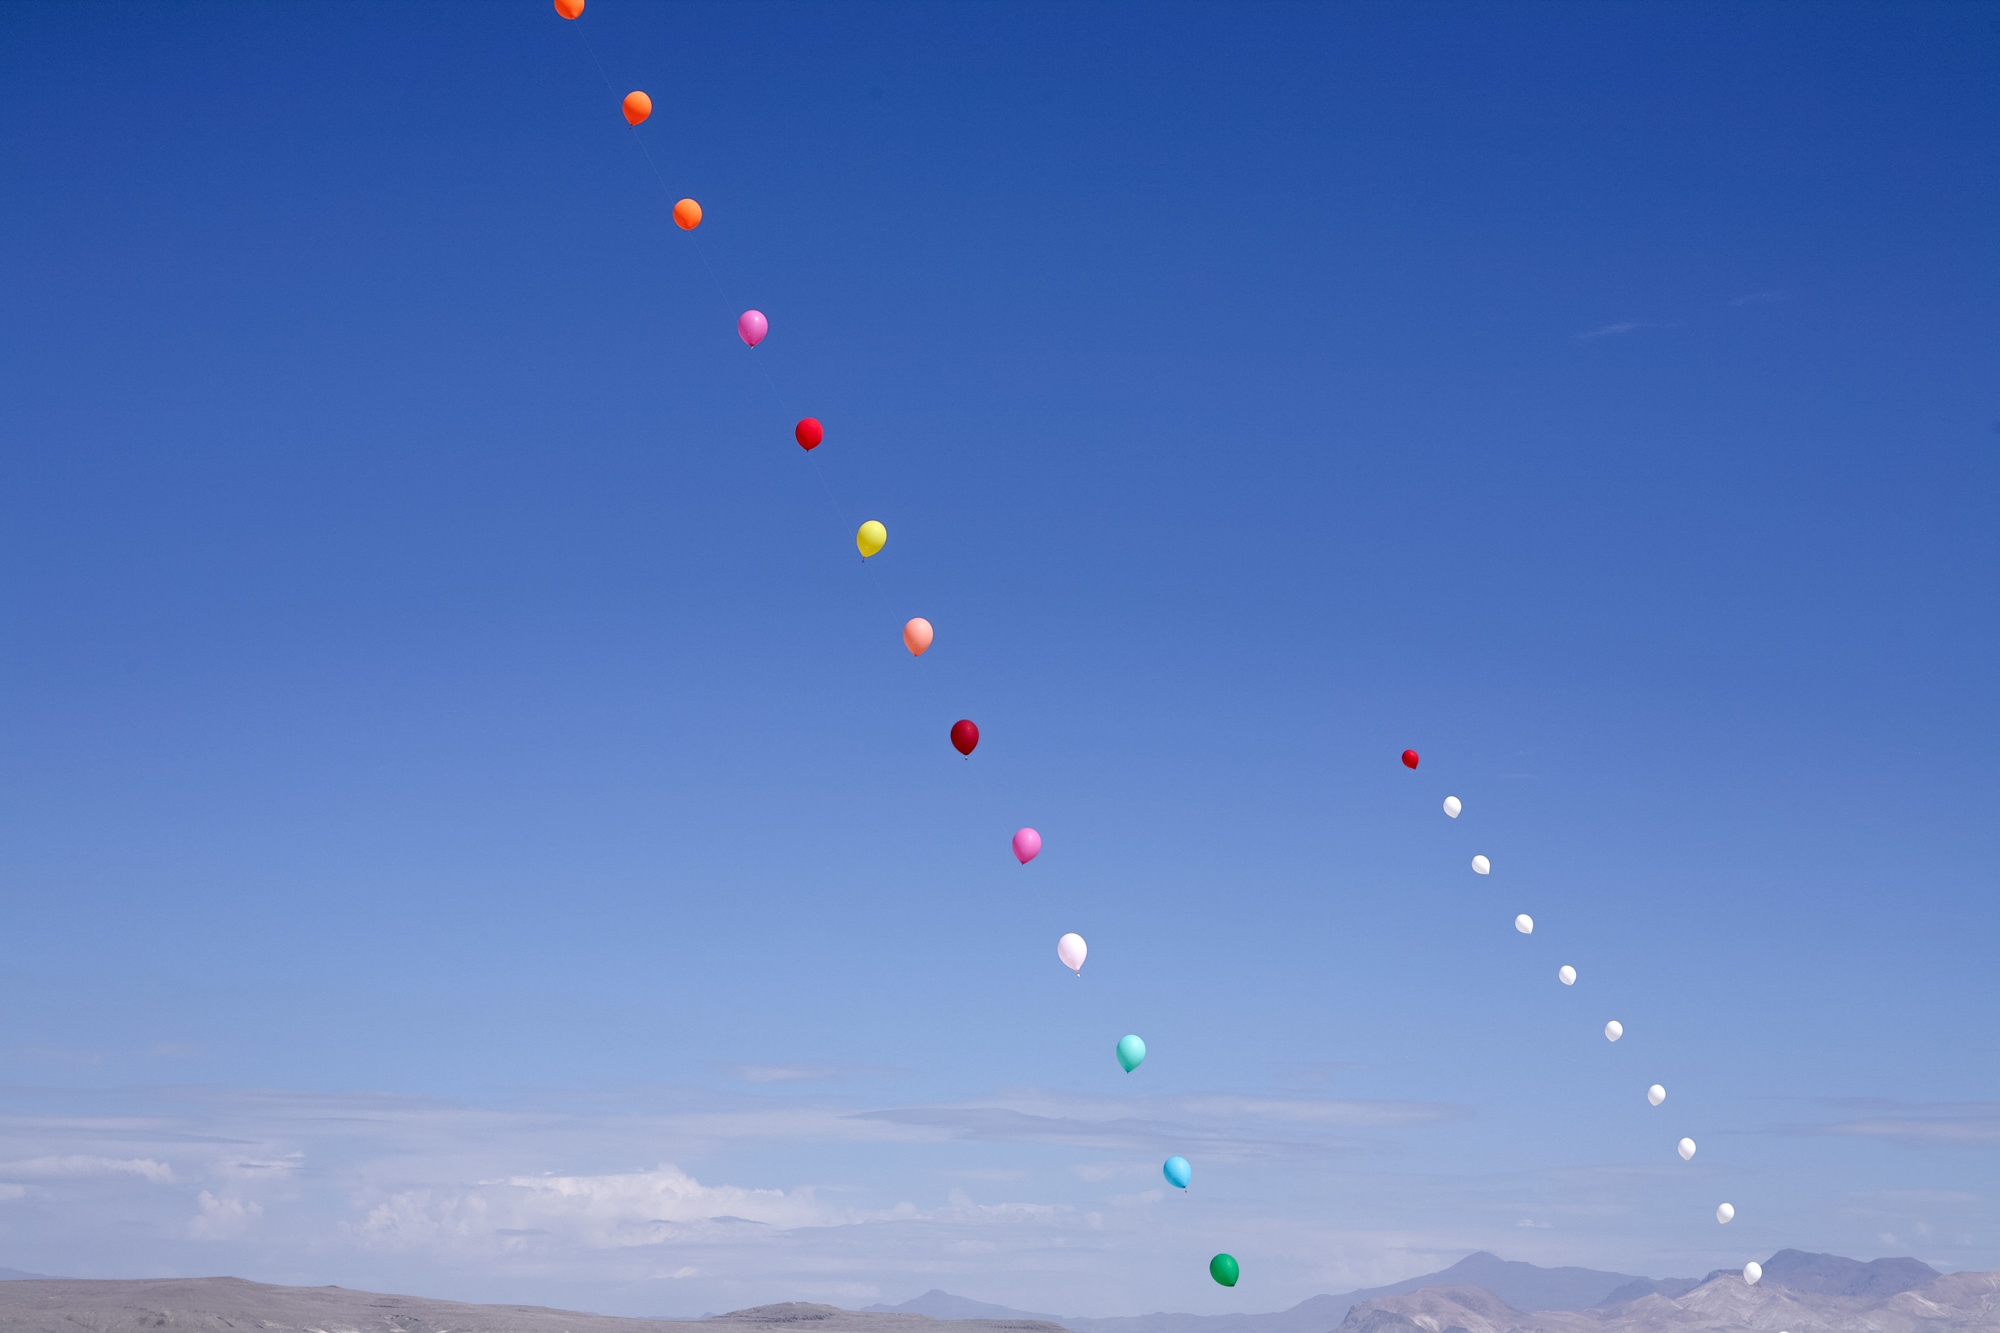 balloons in the air, with bells